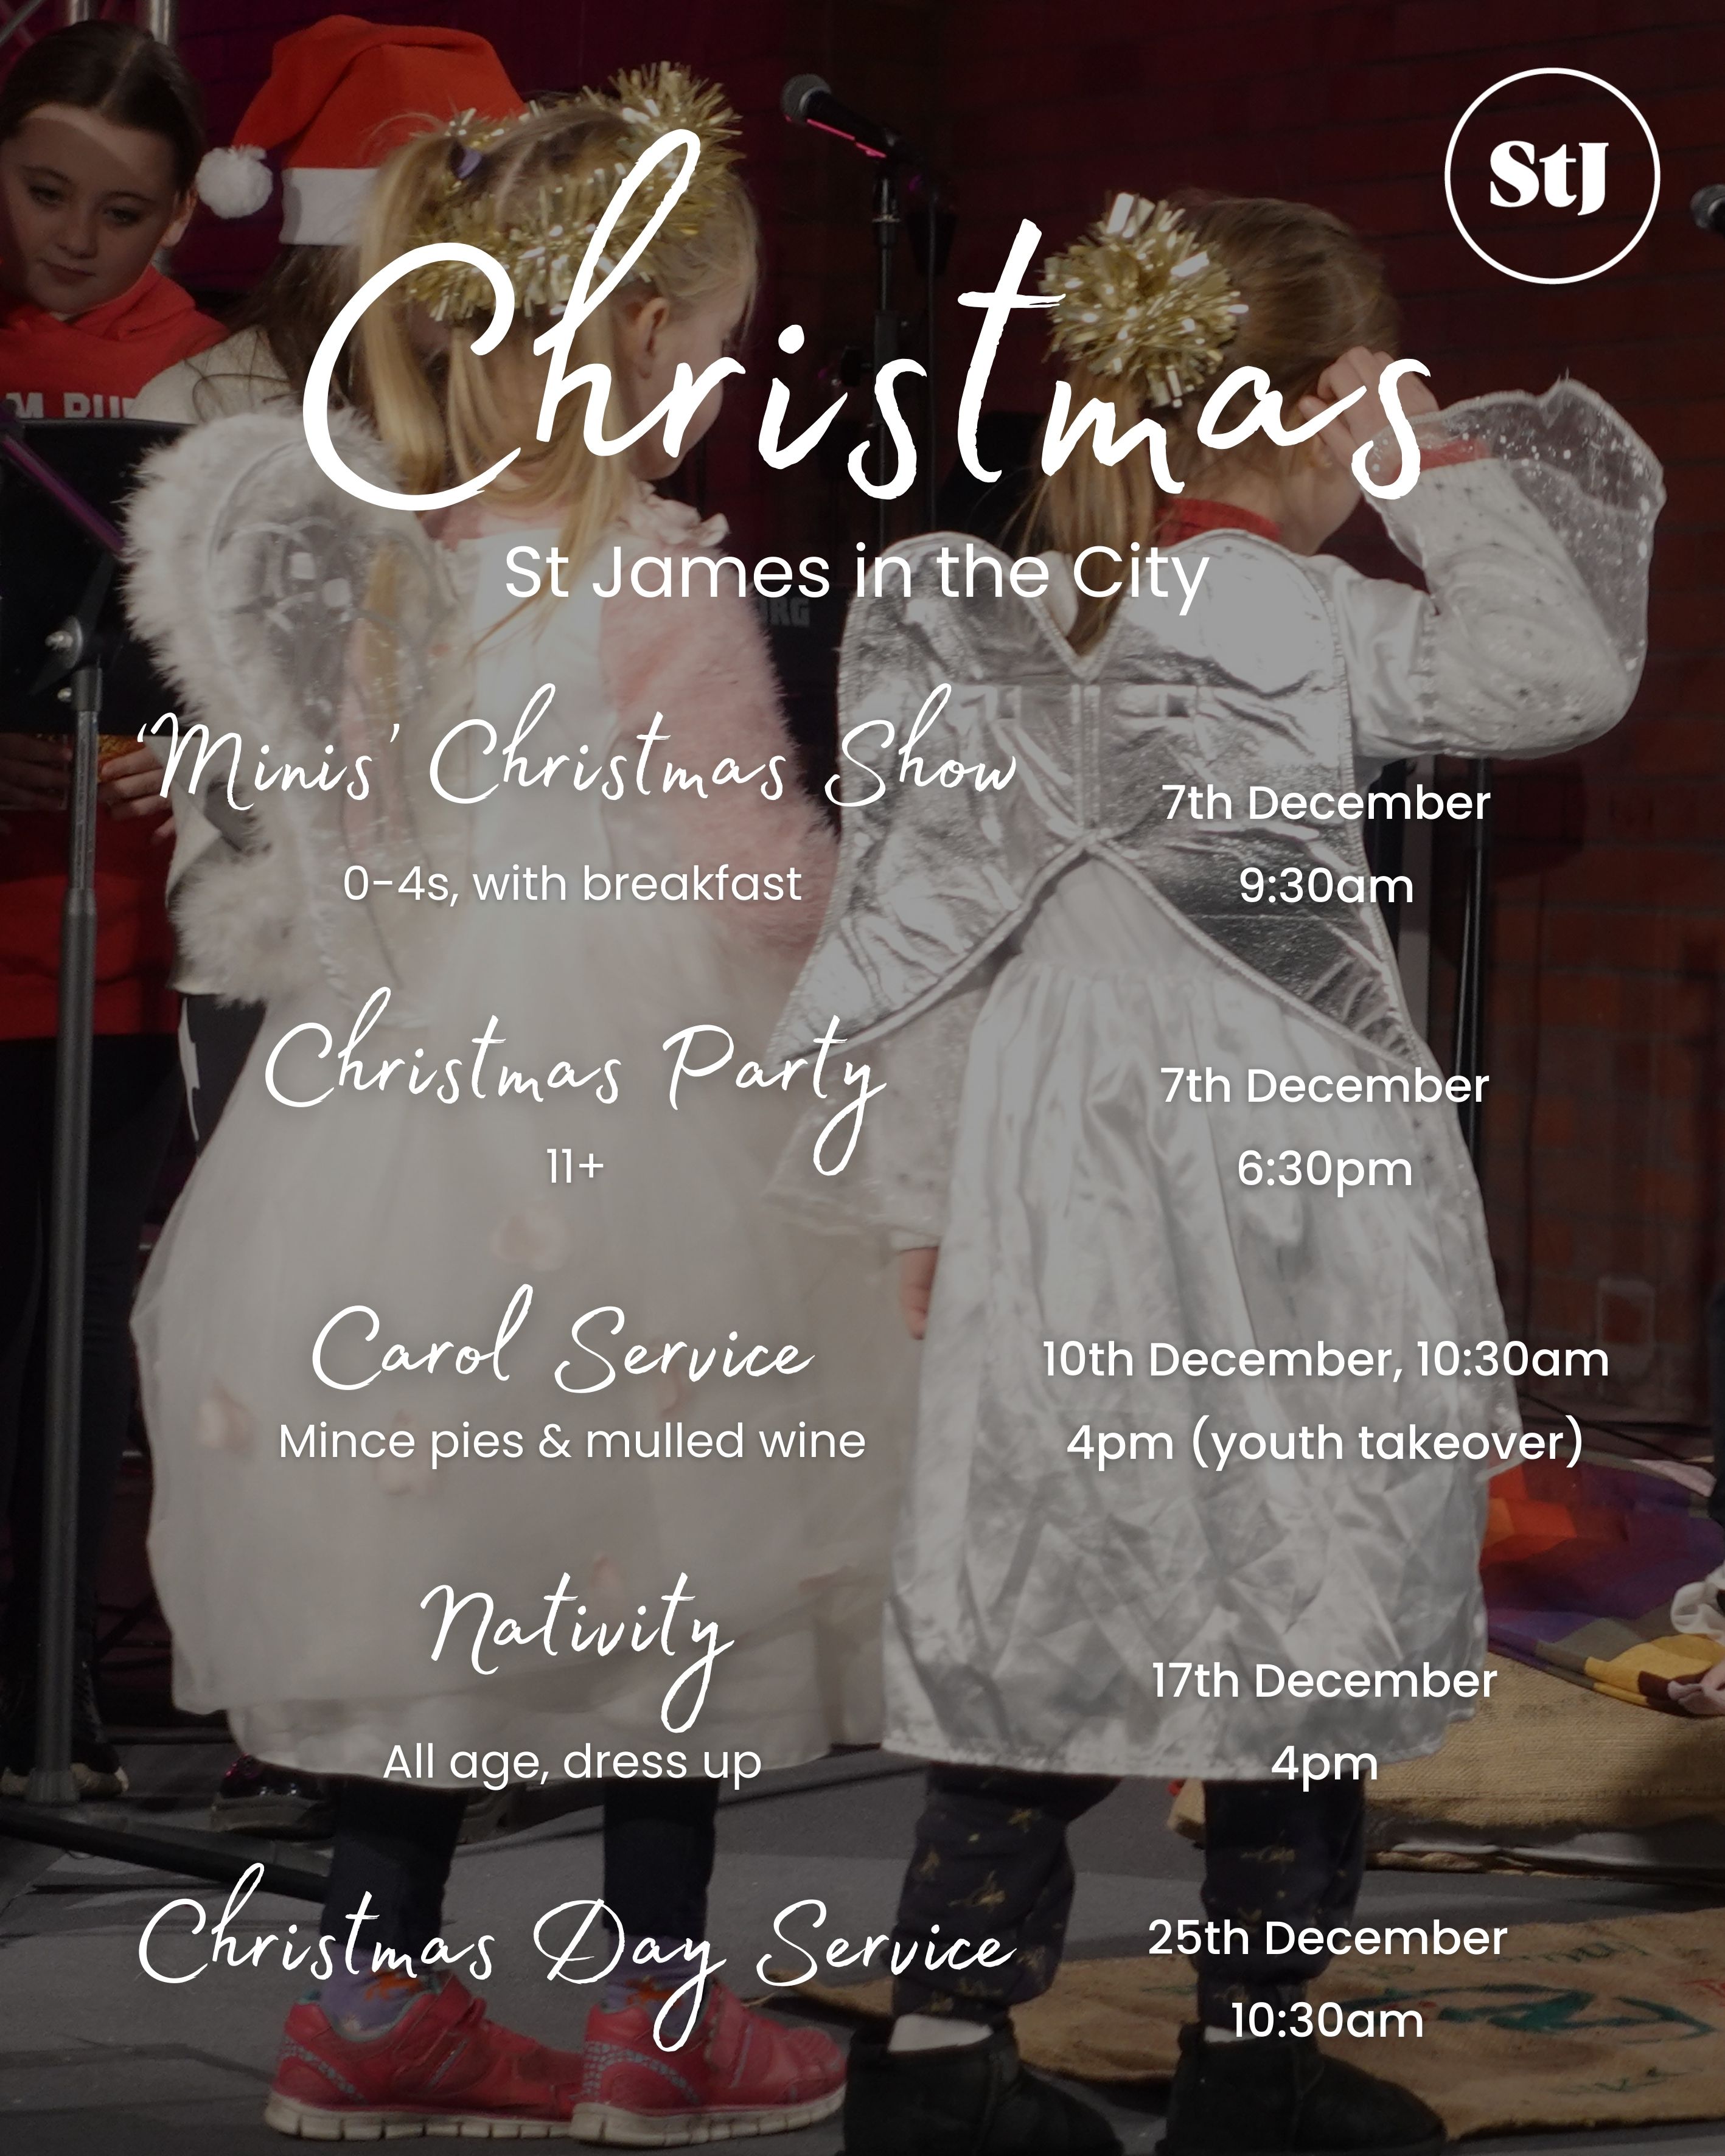 Copy of Christmas flyer